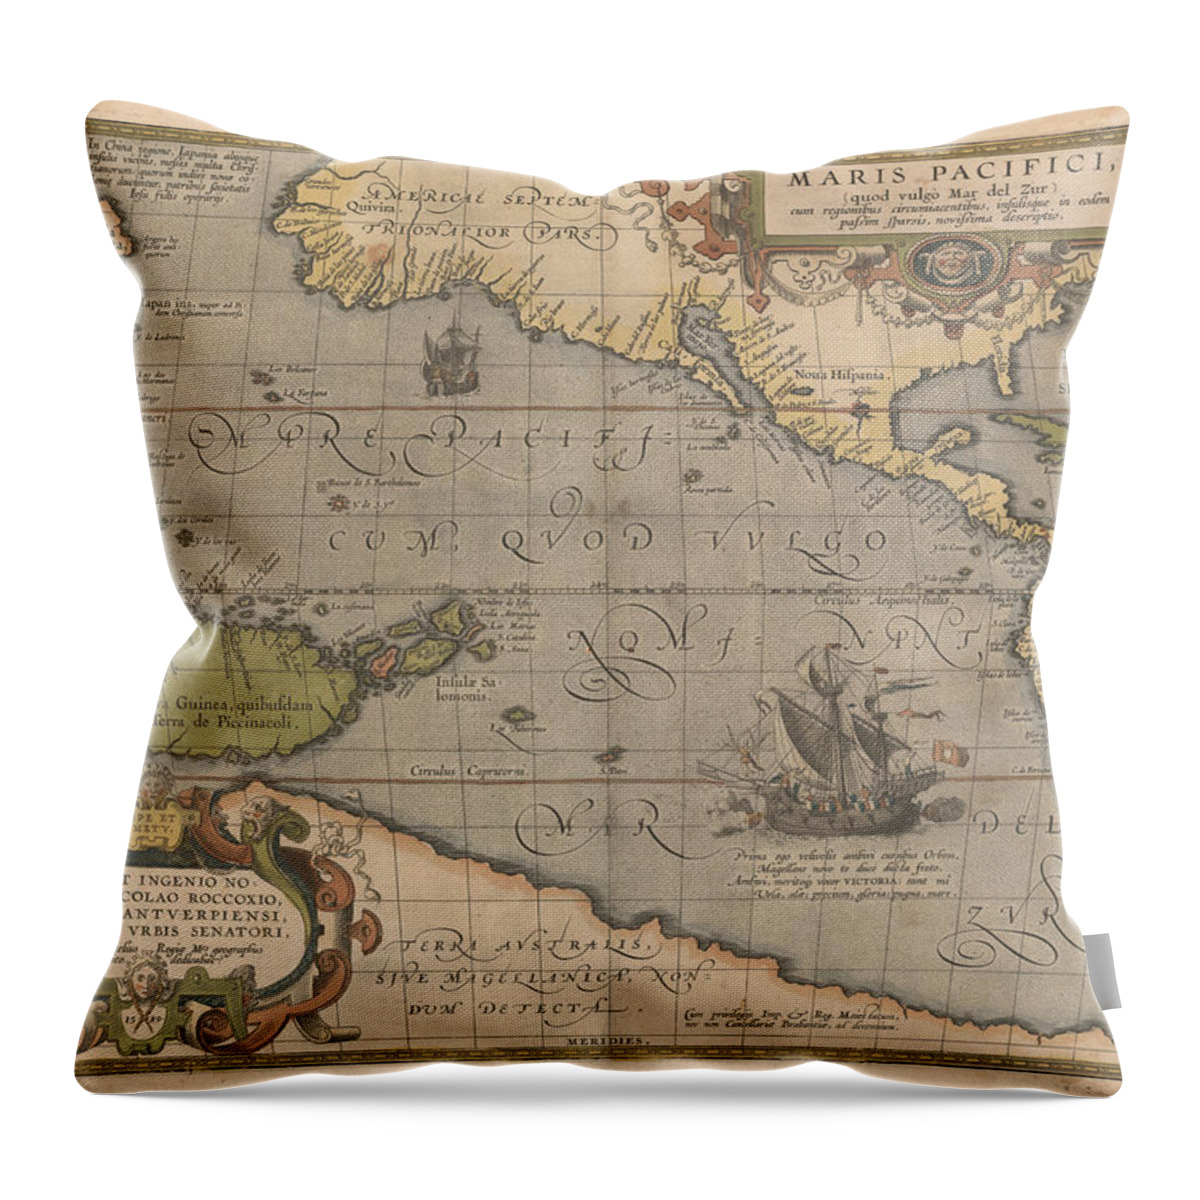 Antique Map Of The Pacific Ocean Throw Pillow featuring the drawing Antique Maps - Old Cartographic maps - Antique Map of the Pacific Ocean - Mar Del Zur, 1589 by Studio Grafiikka